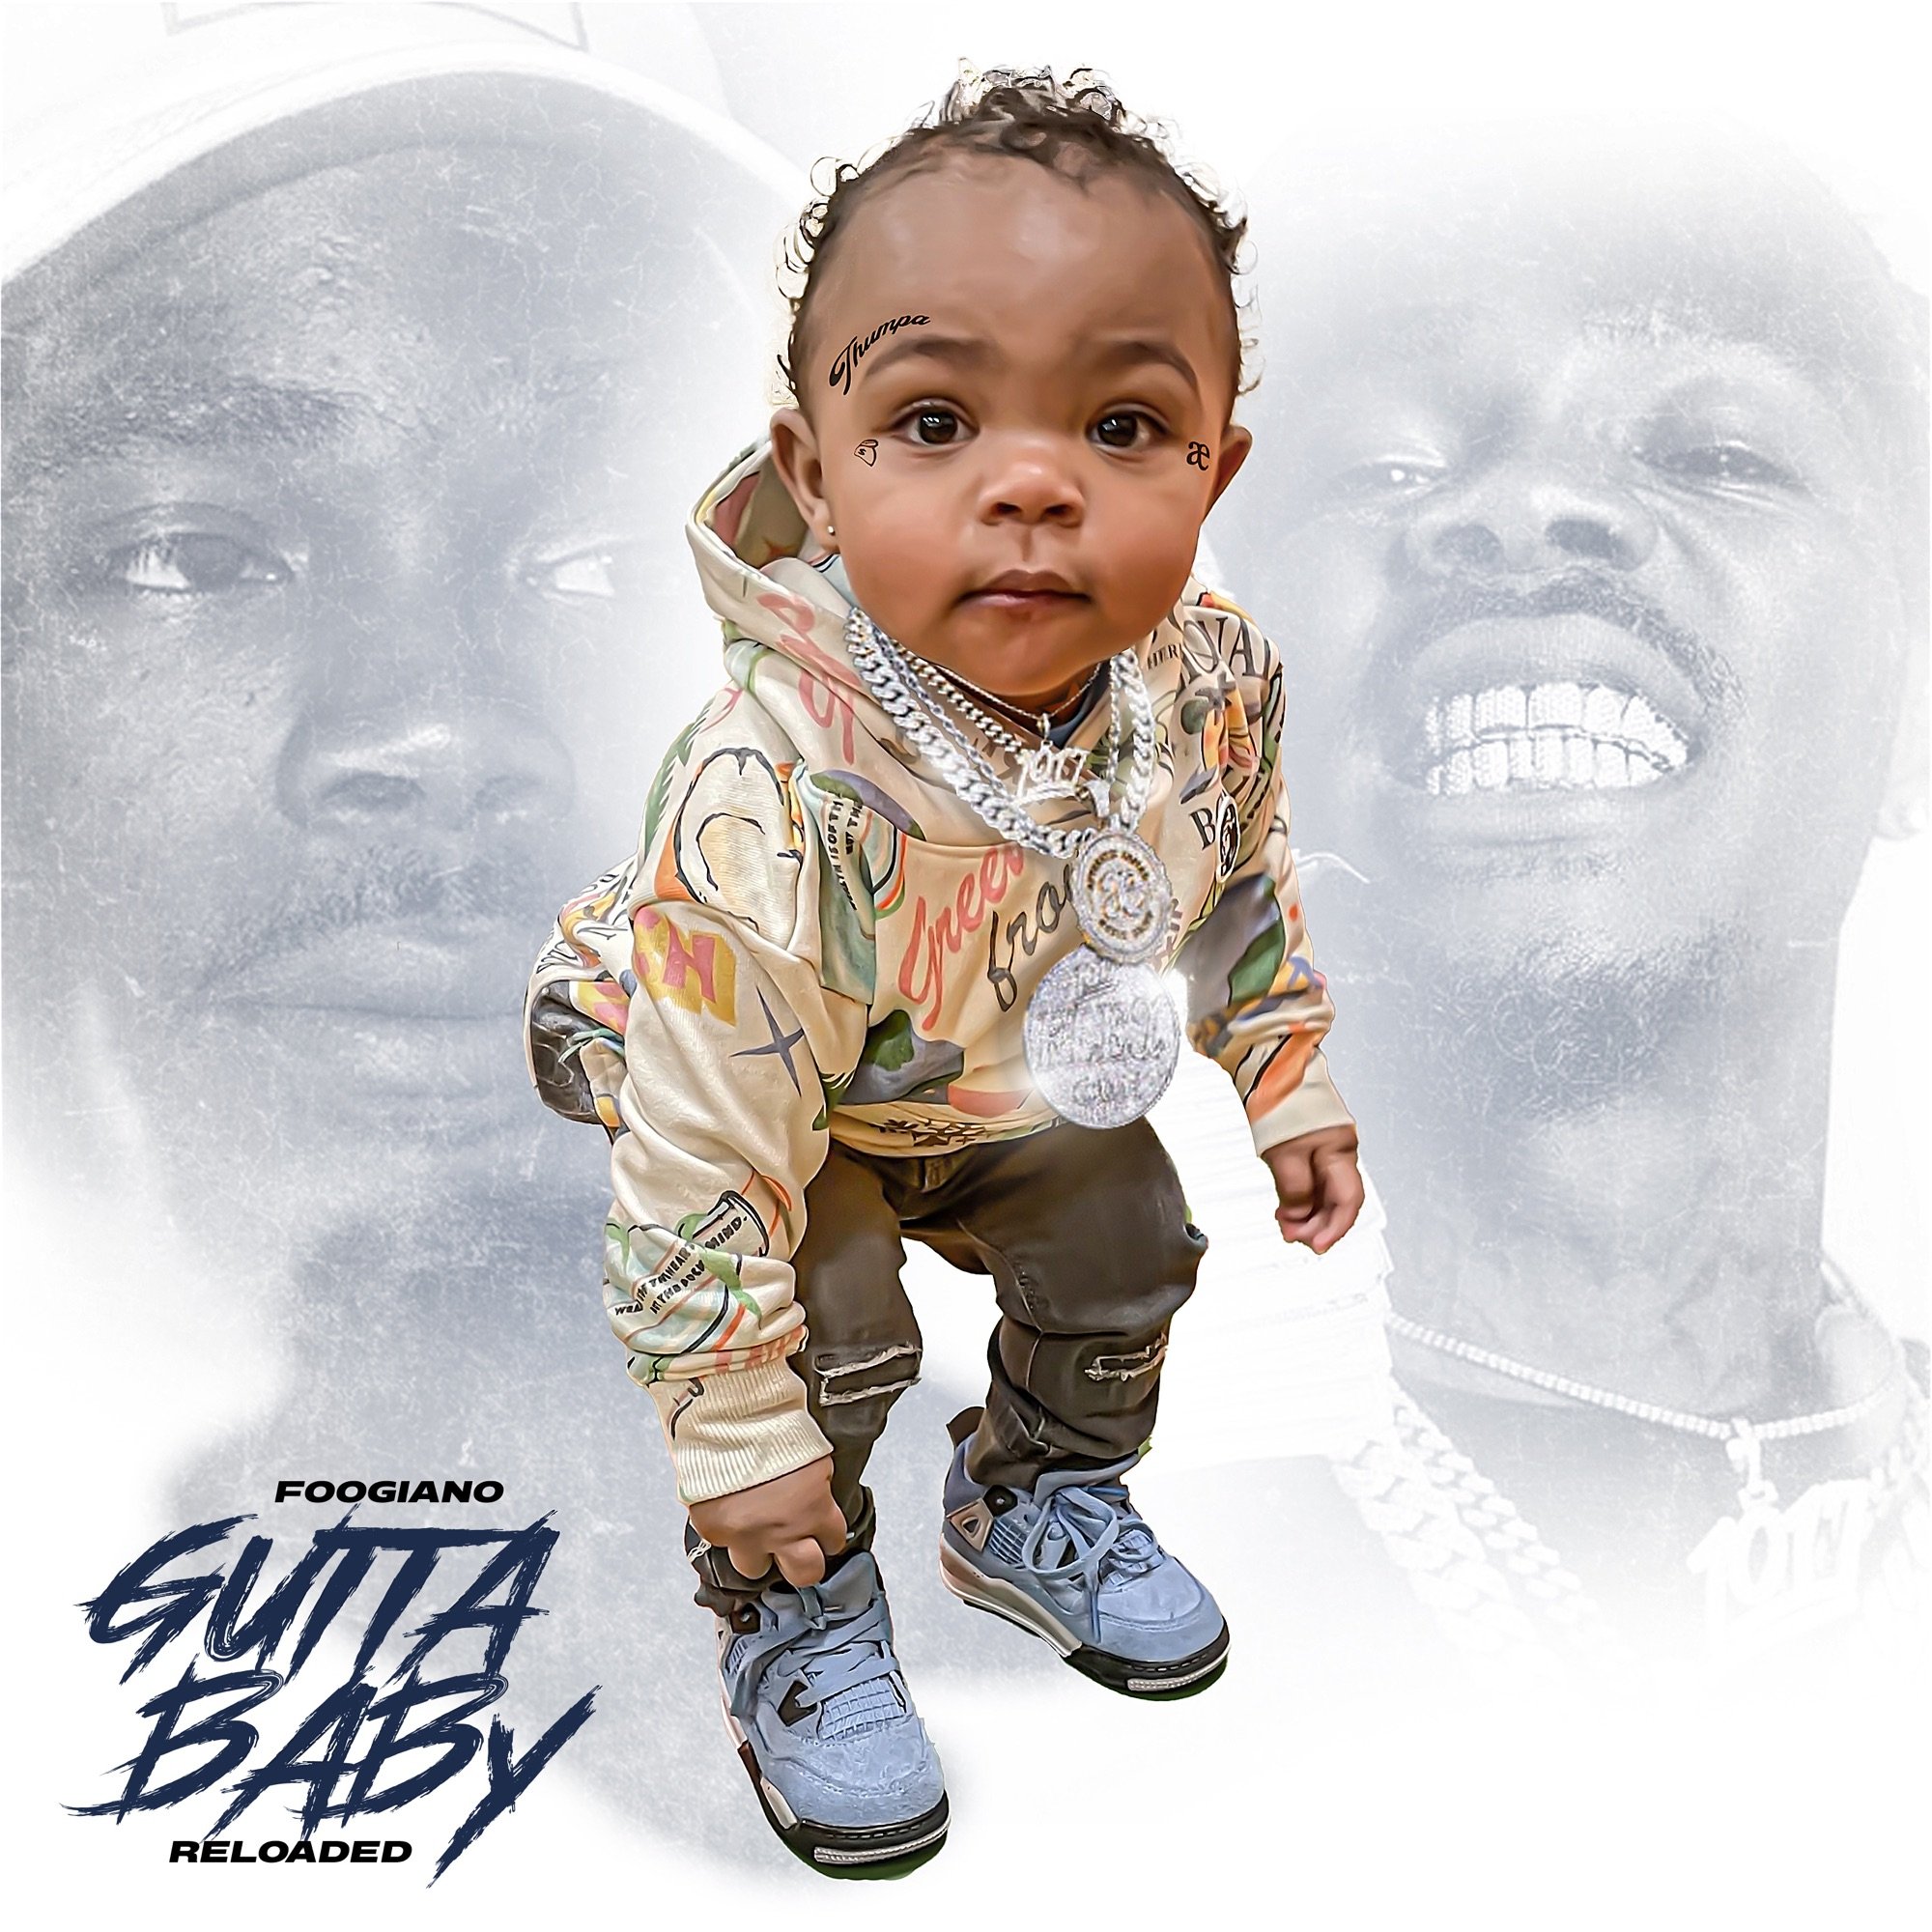 Foogiano - Gutta Baby: Reloaded (2022) FLAC Download